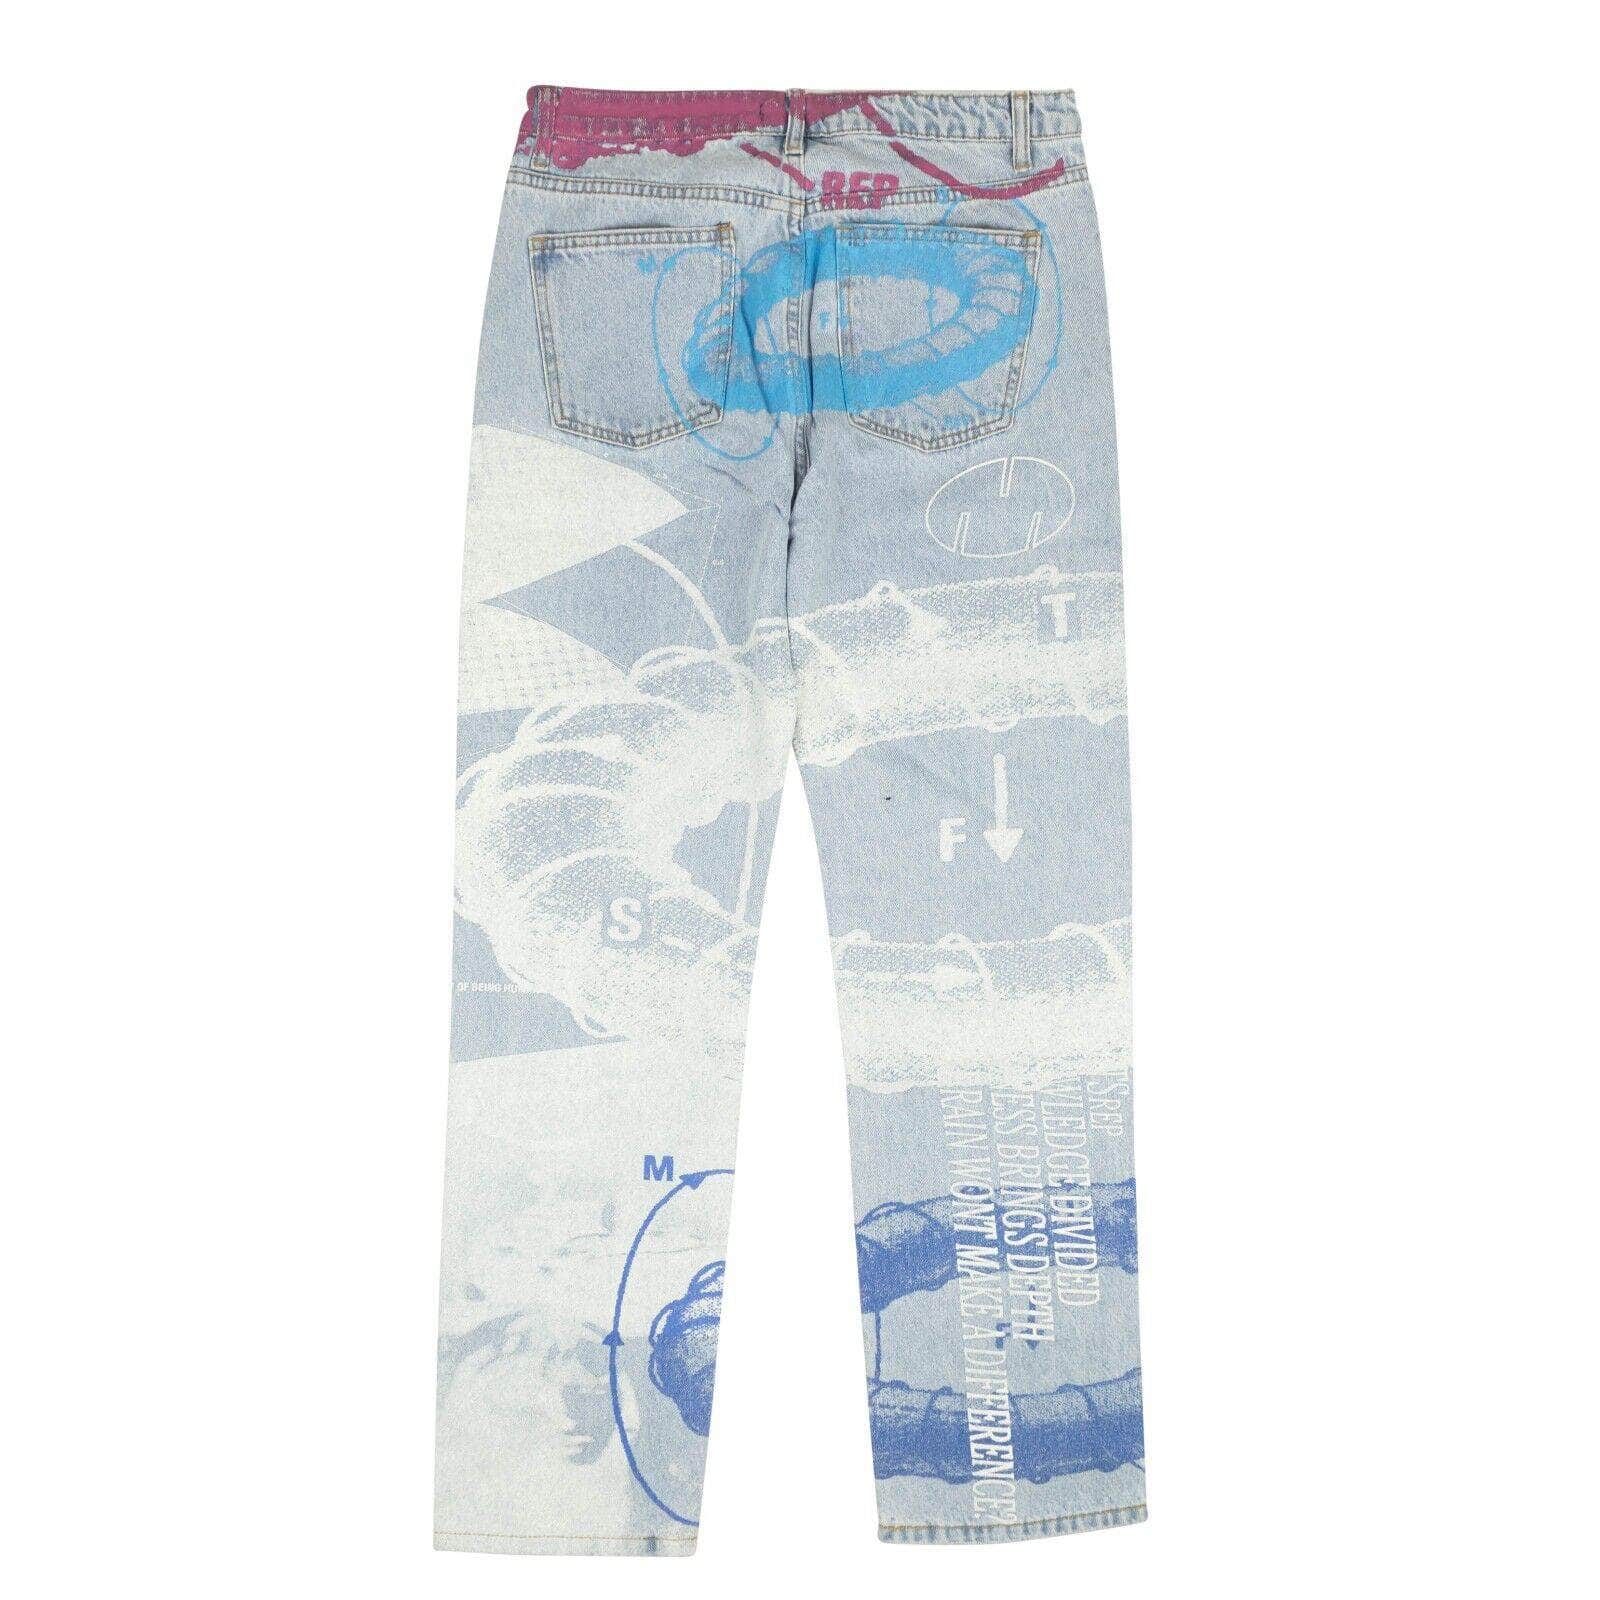 MSFTS Rep channelenable-all, chicmi, couponcollection, gender-mens, main-clothing, mens-shoes, mens-straight-fit-jeans, MixedApparel, msfts-rep, size-30, size-31, size-32, under-250 Blue And Multi Denim Straight Jeans